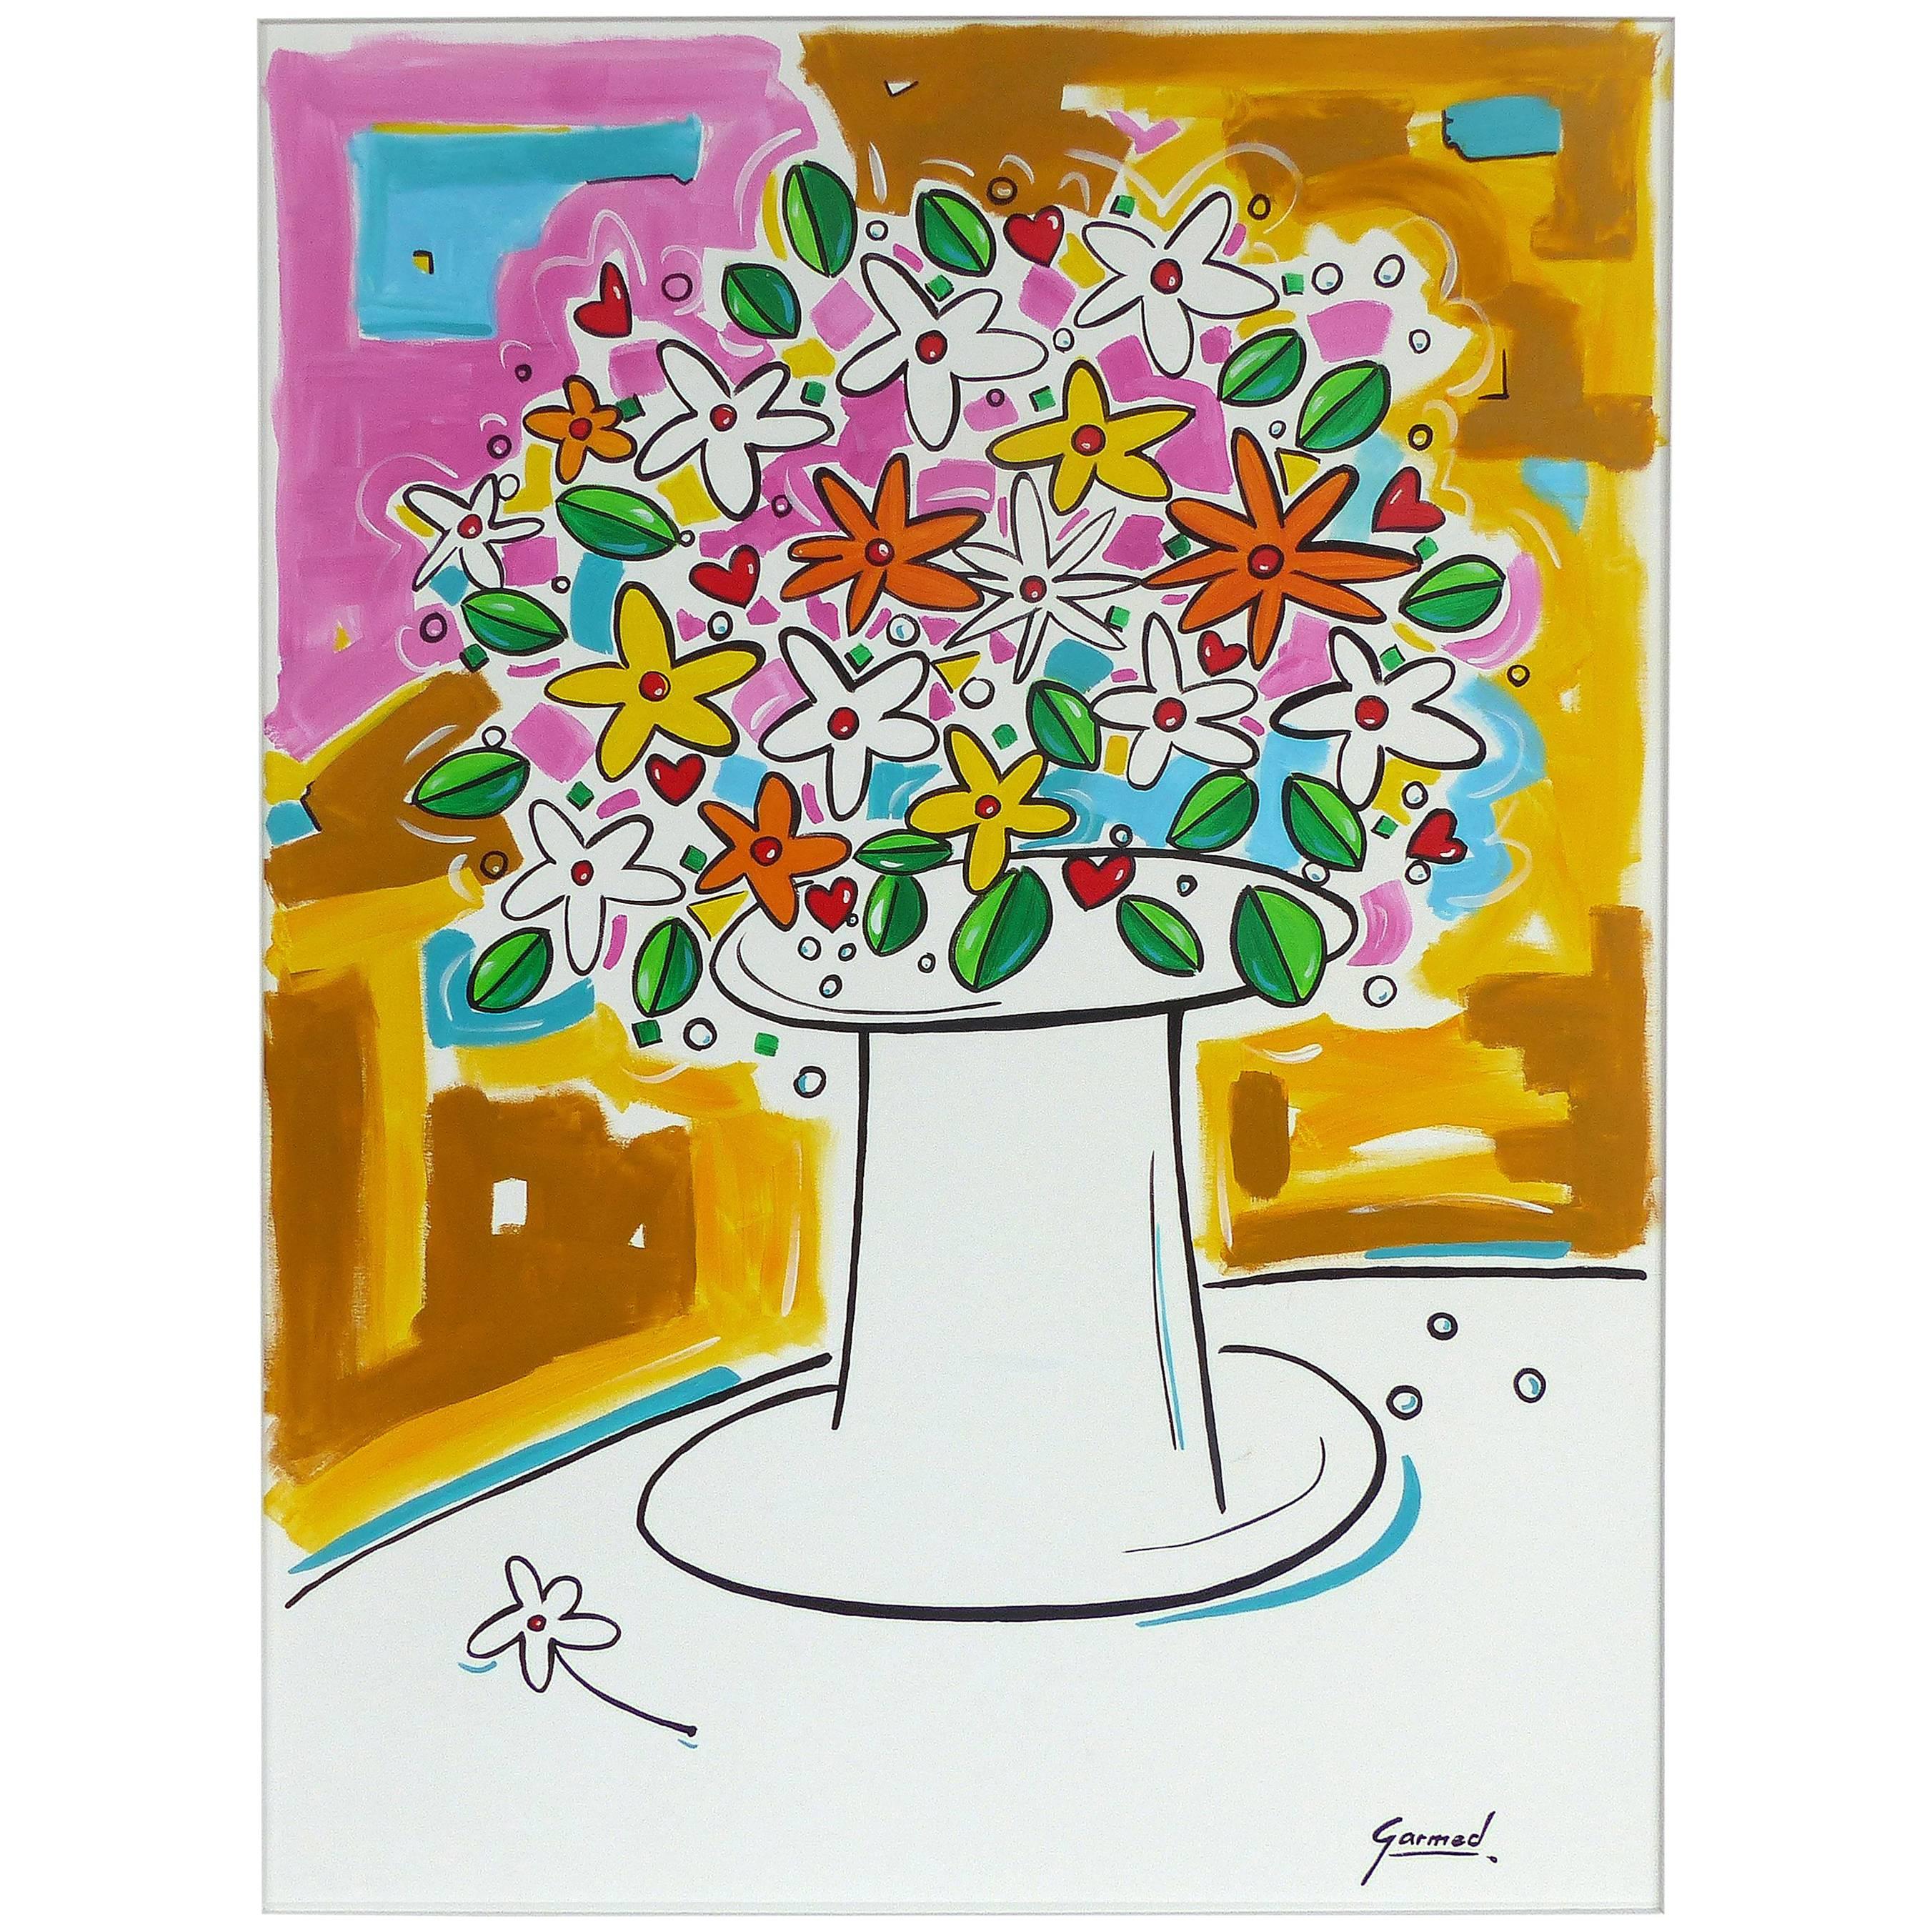 Acrylic on Canvas of a Floral Still Life Titled "Love" by Garmed For Sale  at 1stDibs